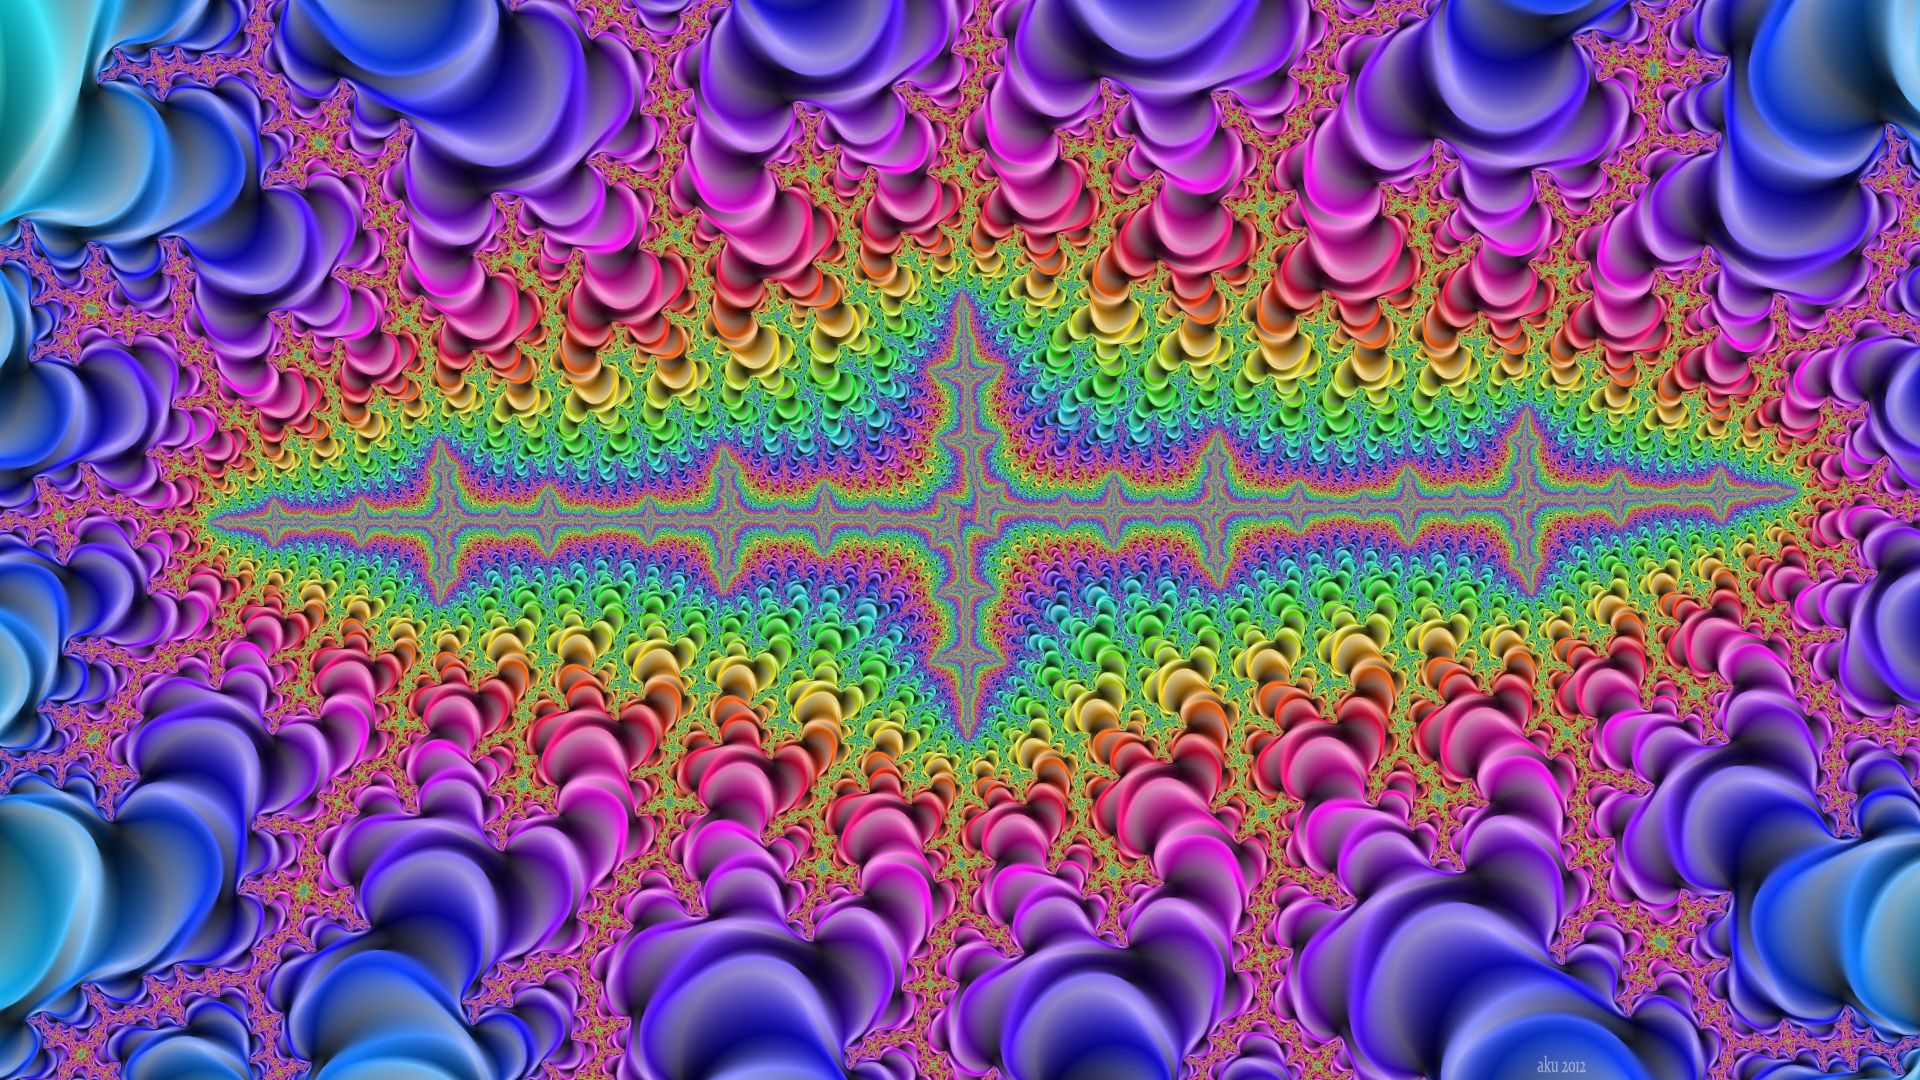 520 Psychedelic HD Wallpapers | Backgrounds - Wallpaper Abyss ...